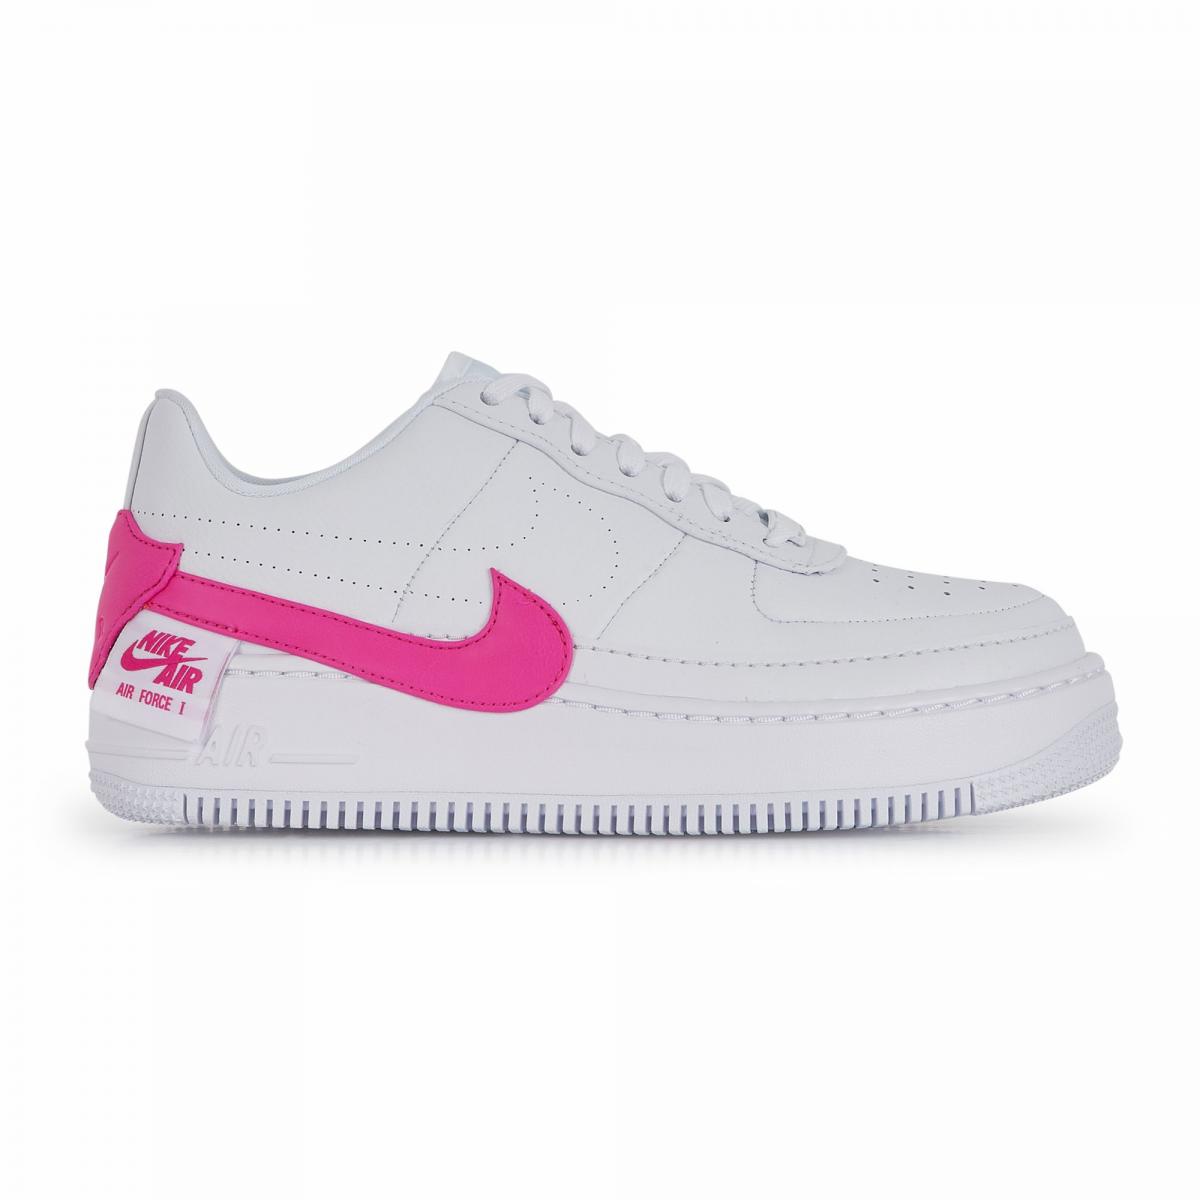 nike air force 1 rose femme,Nike AIR FORCE 1 SAGE LOW W Rose - Chaussures  Baskets basses Femme